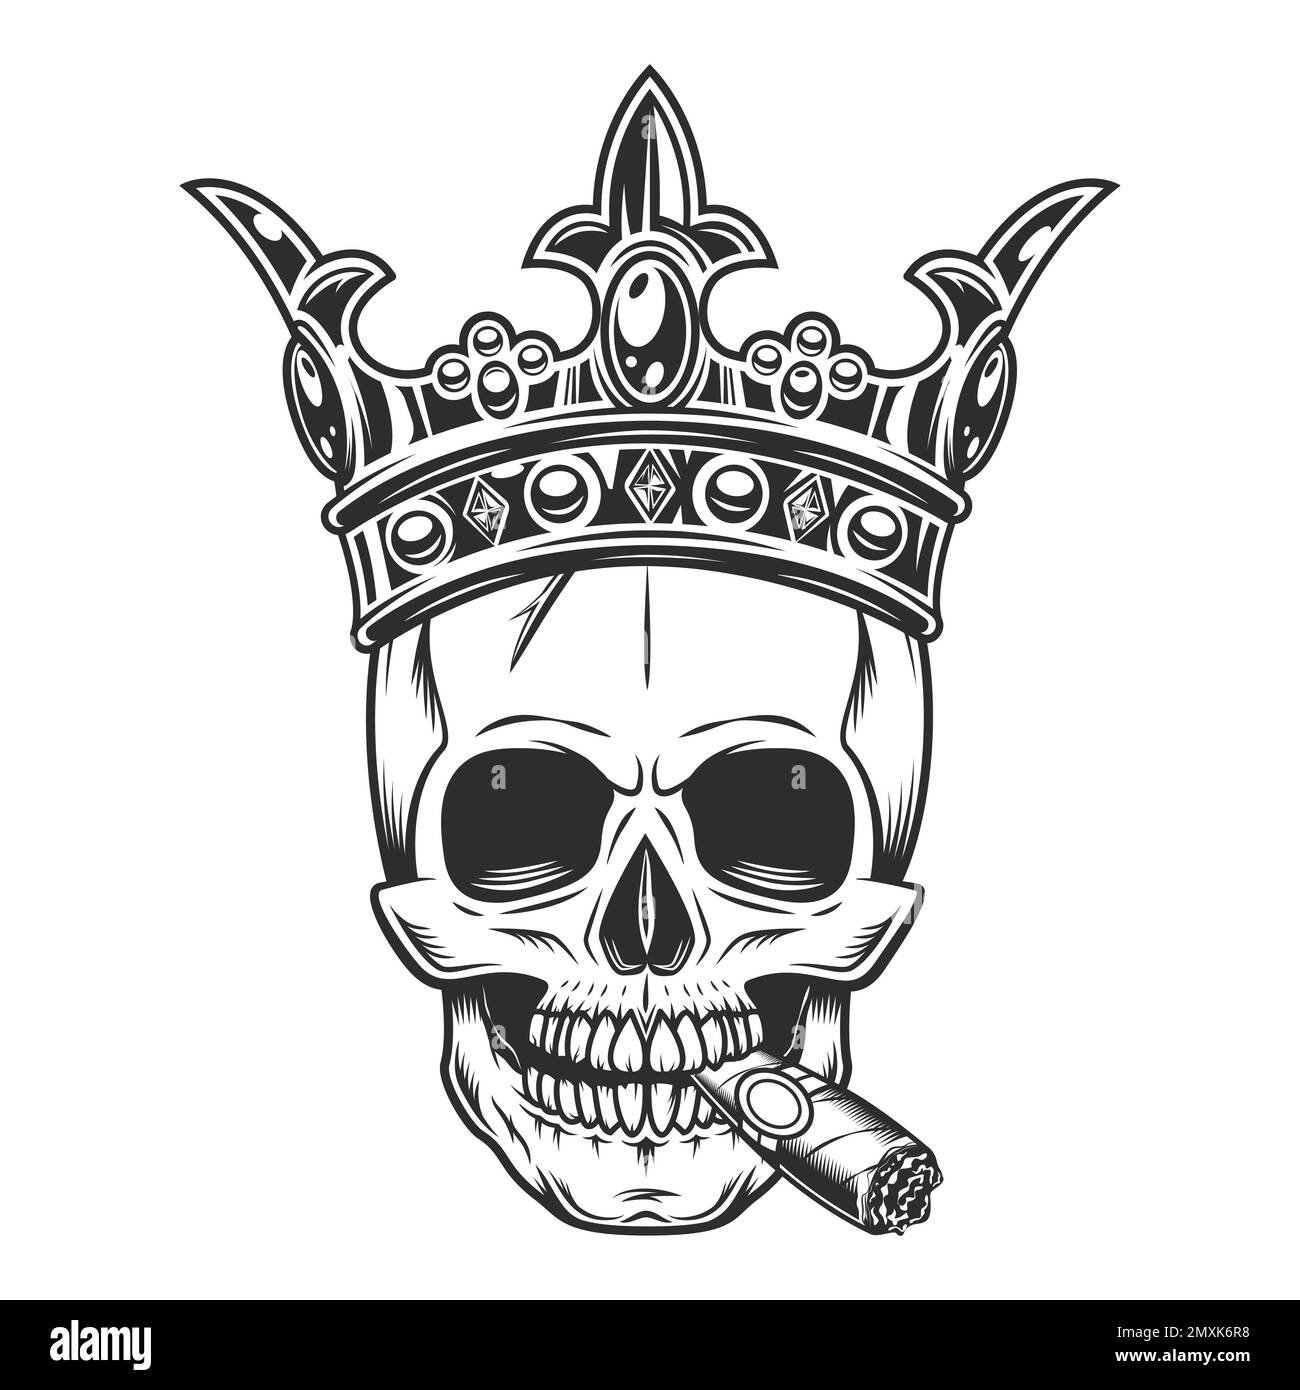 Skull smoking cigar or cigarette smoke in crown king monochrome illustration isolated on white background. Vintage crowning, elegant queen or king cro Stock Vector